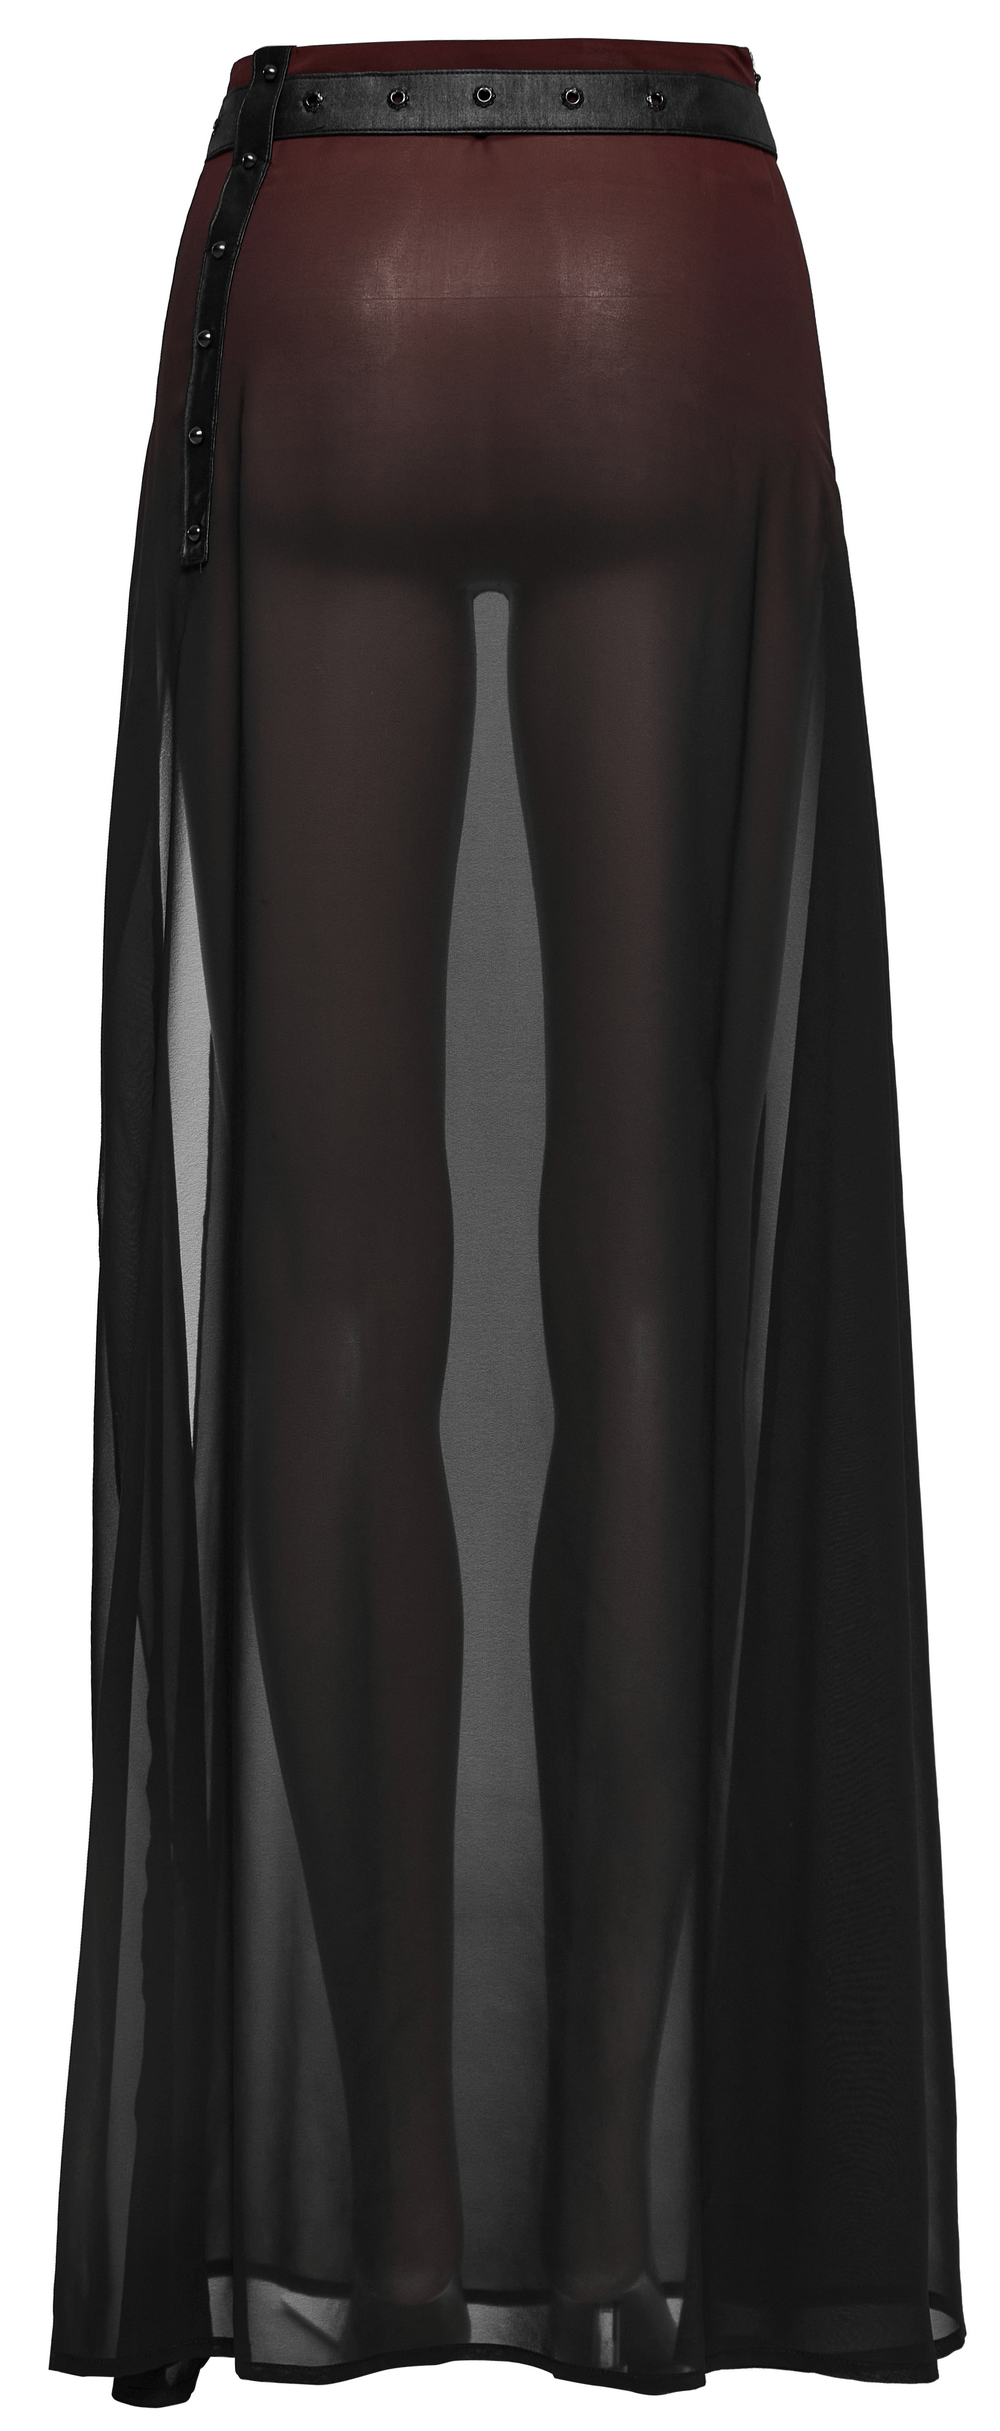 Chic Sheer Maxi A-Line Skirt With High Slit and Belt